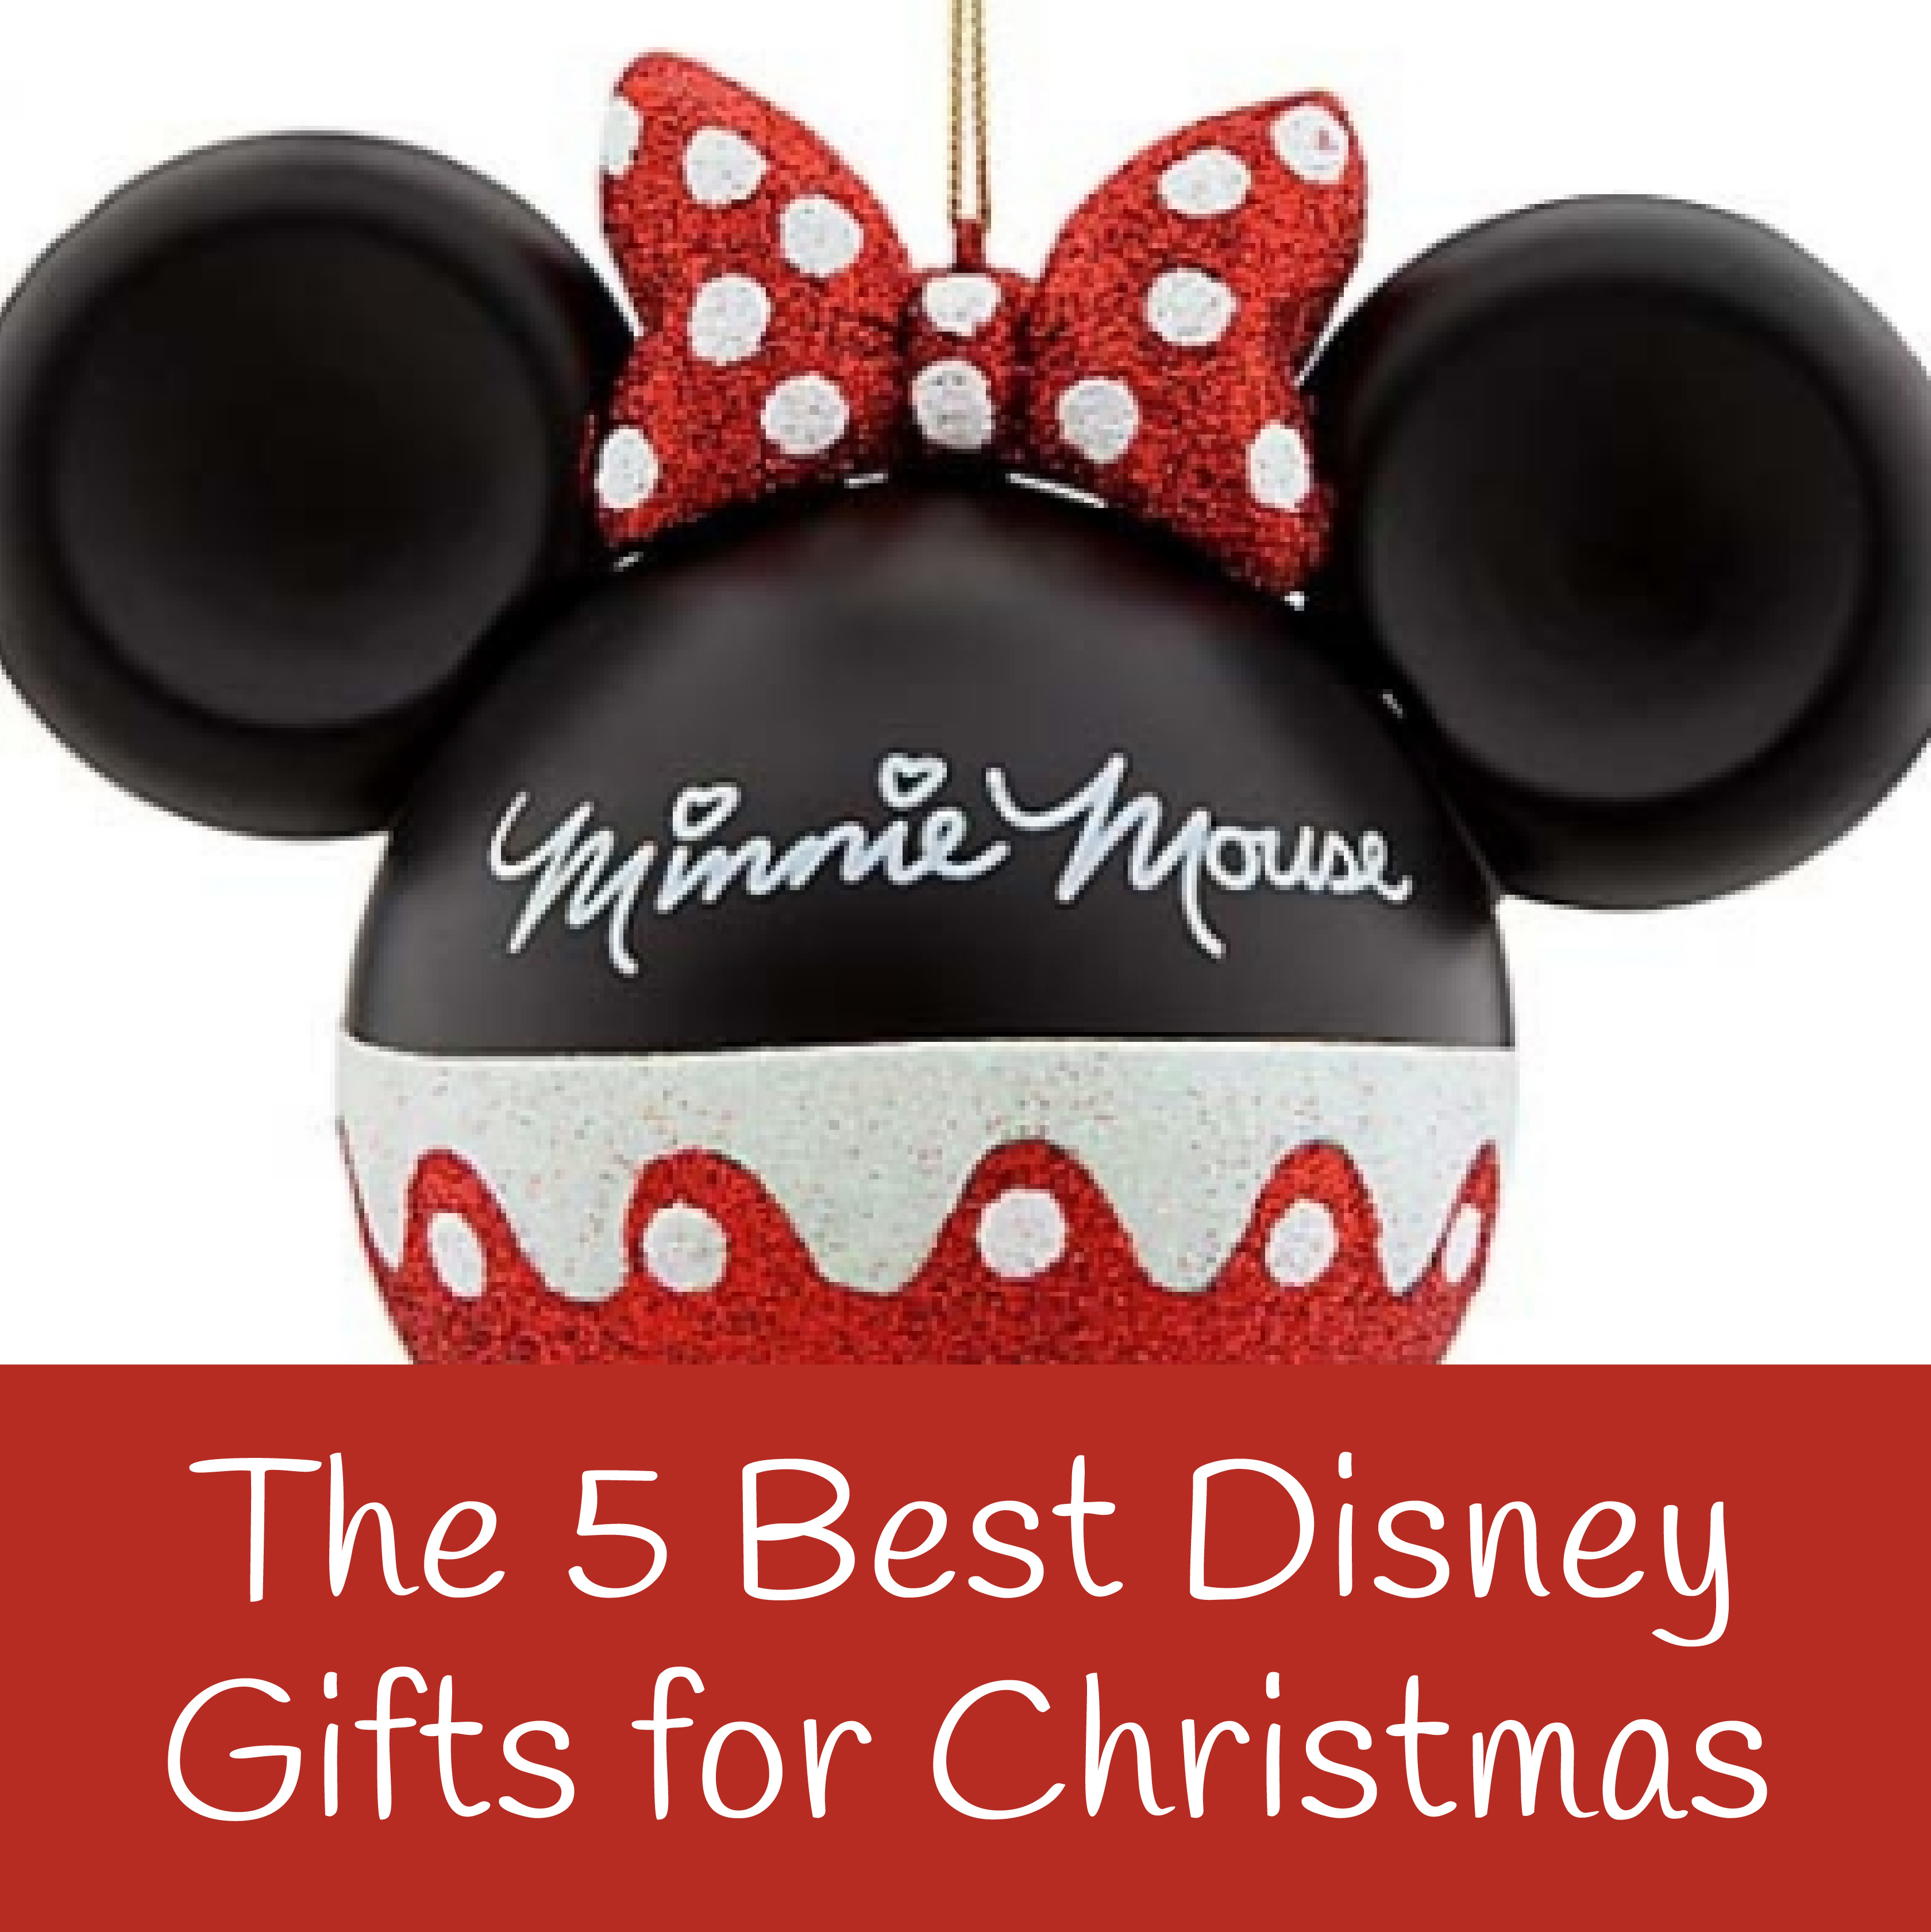 The 5 best Disney gifts for Christmas